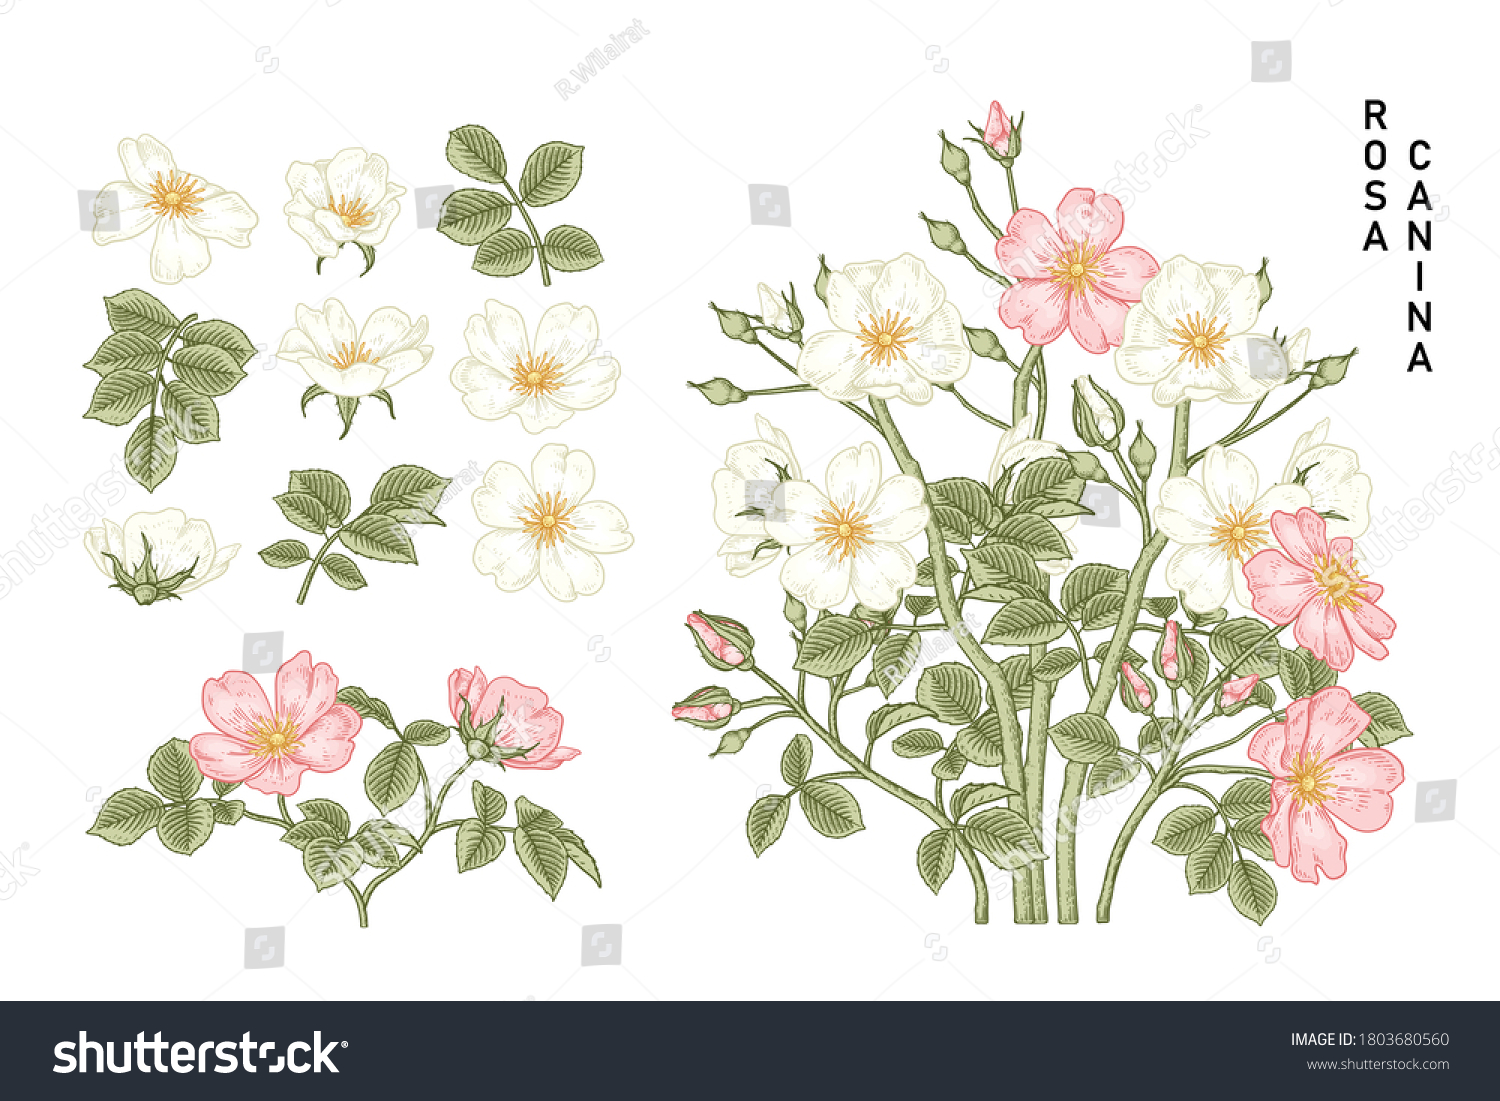 Sketch Floral decorative set. White and Pink Dog rose (Rosa canina) flower drawings. Vintage line art isolated on white backgrounds. Hand Drawn Botanical Illustrations. Elements vector.
 #1803680560